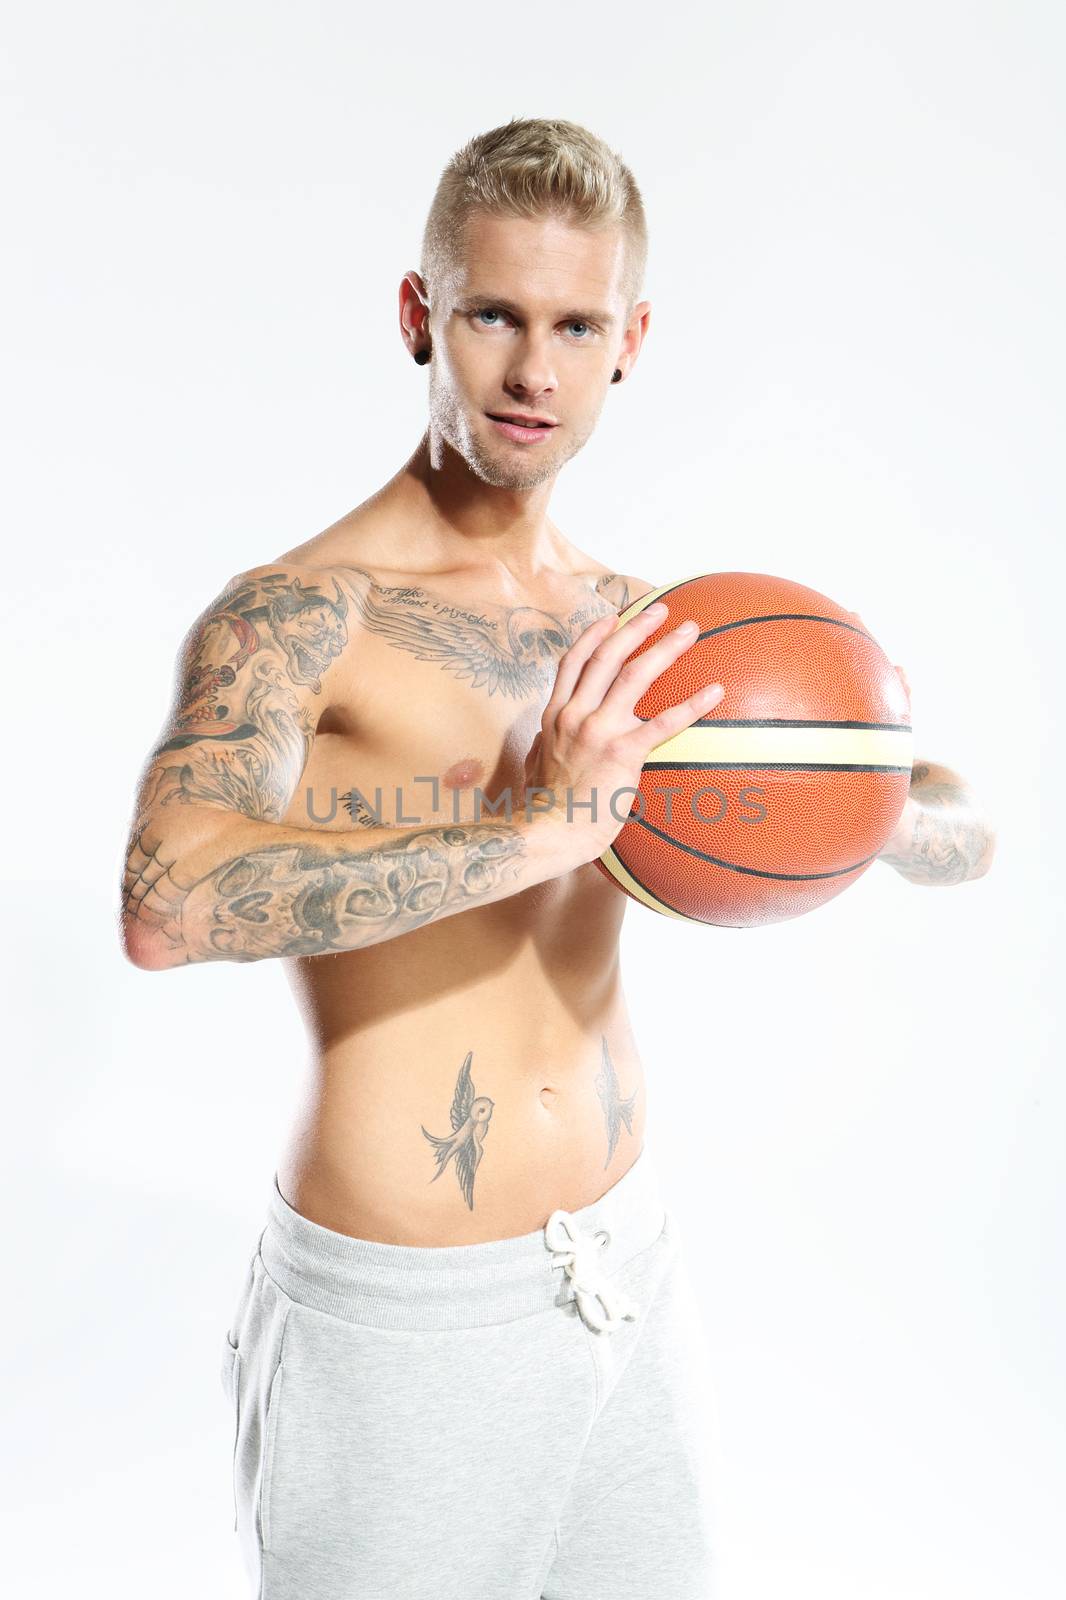 handsome basketball player by robert_przybysz